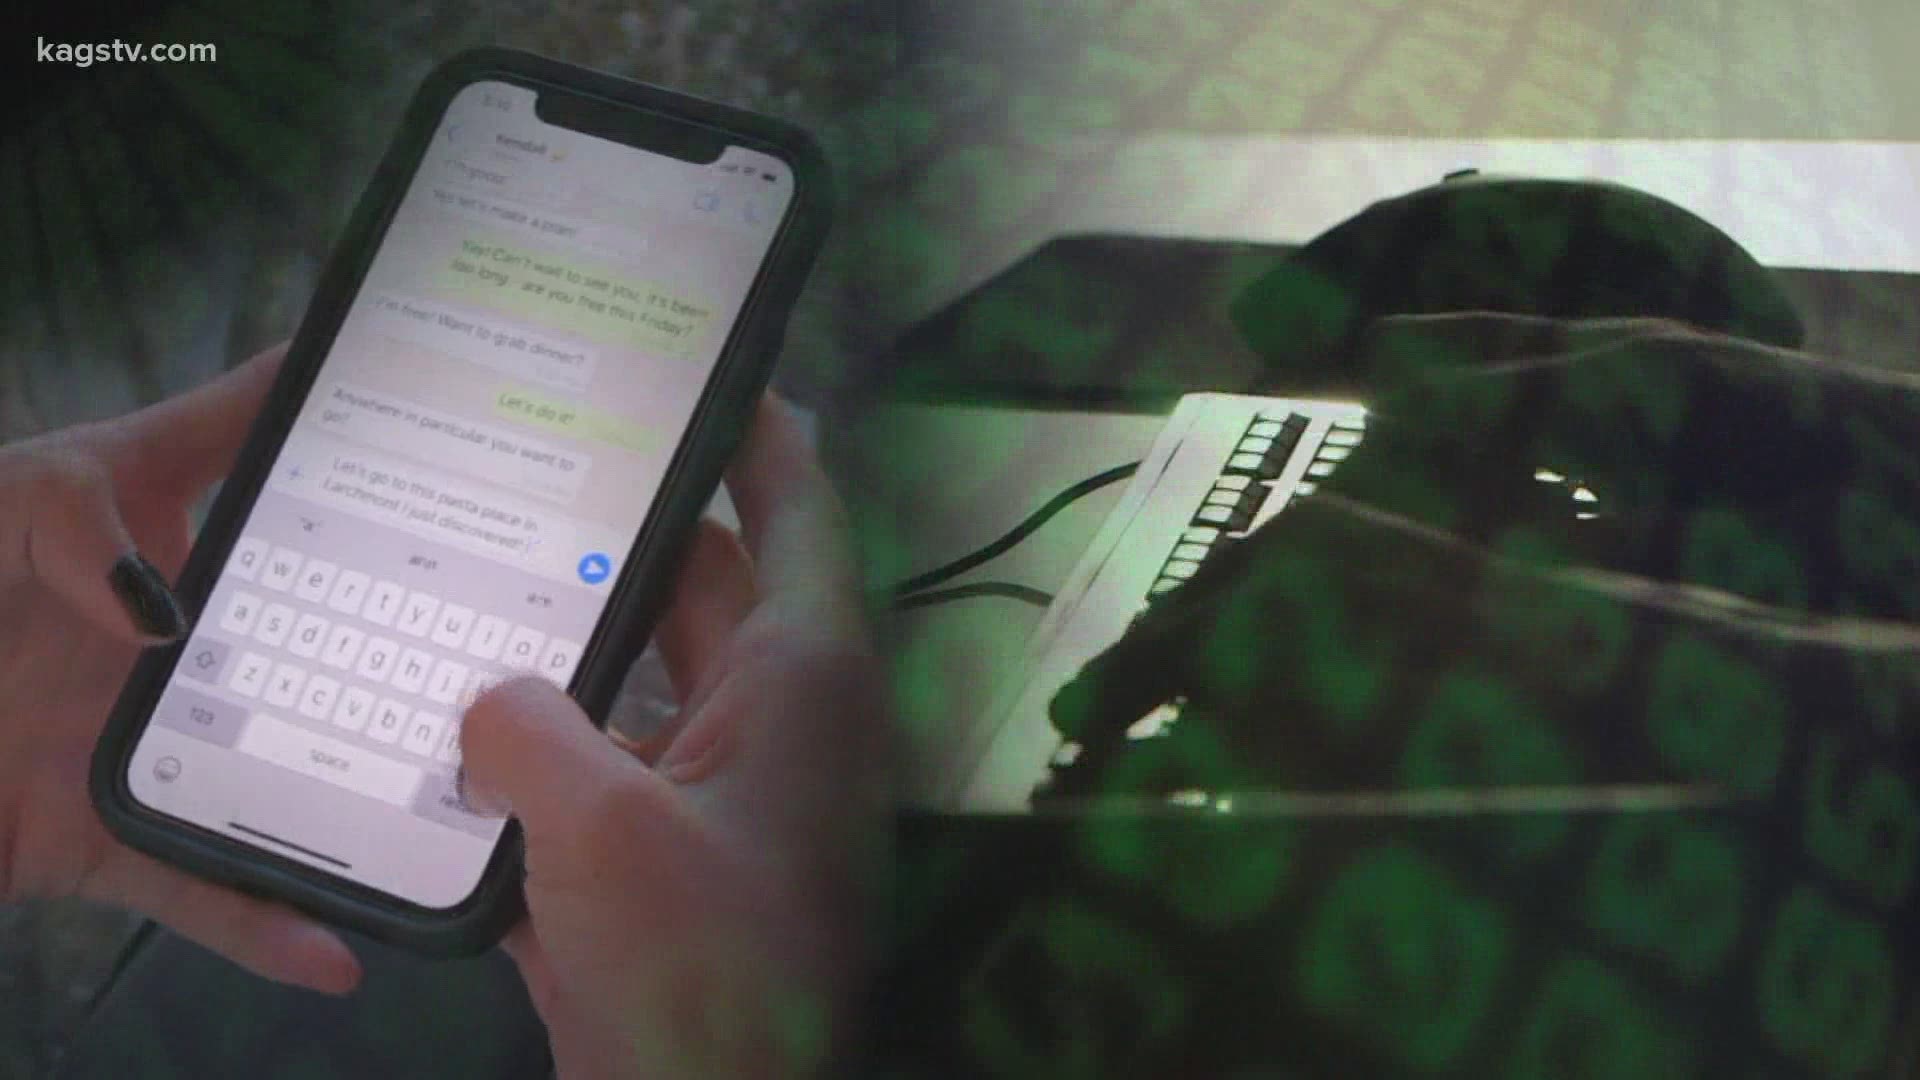 The College Station Police Department wants you to be cautious when it comes to getting messages from people you don't know.